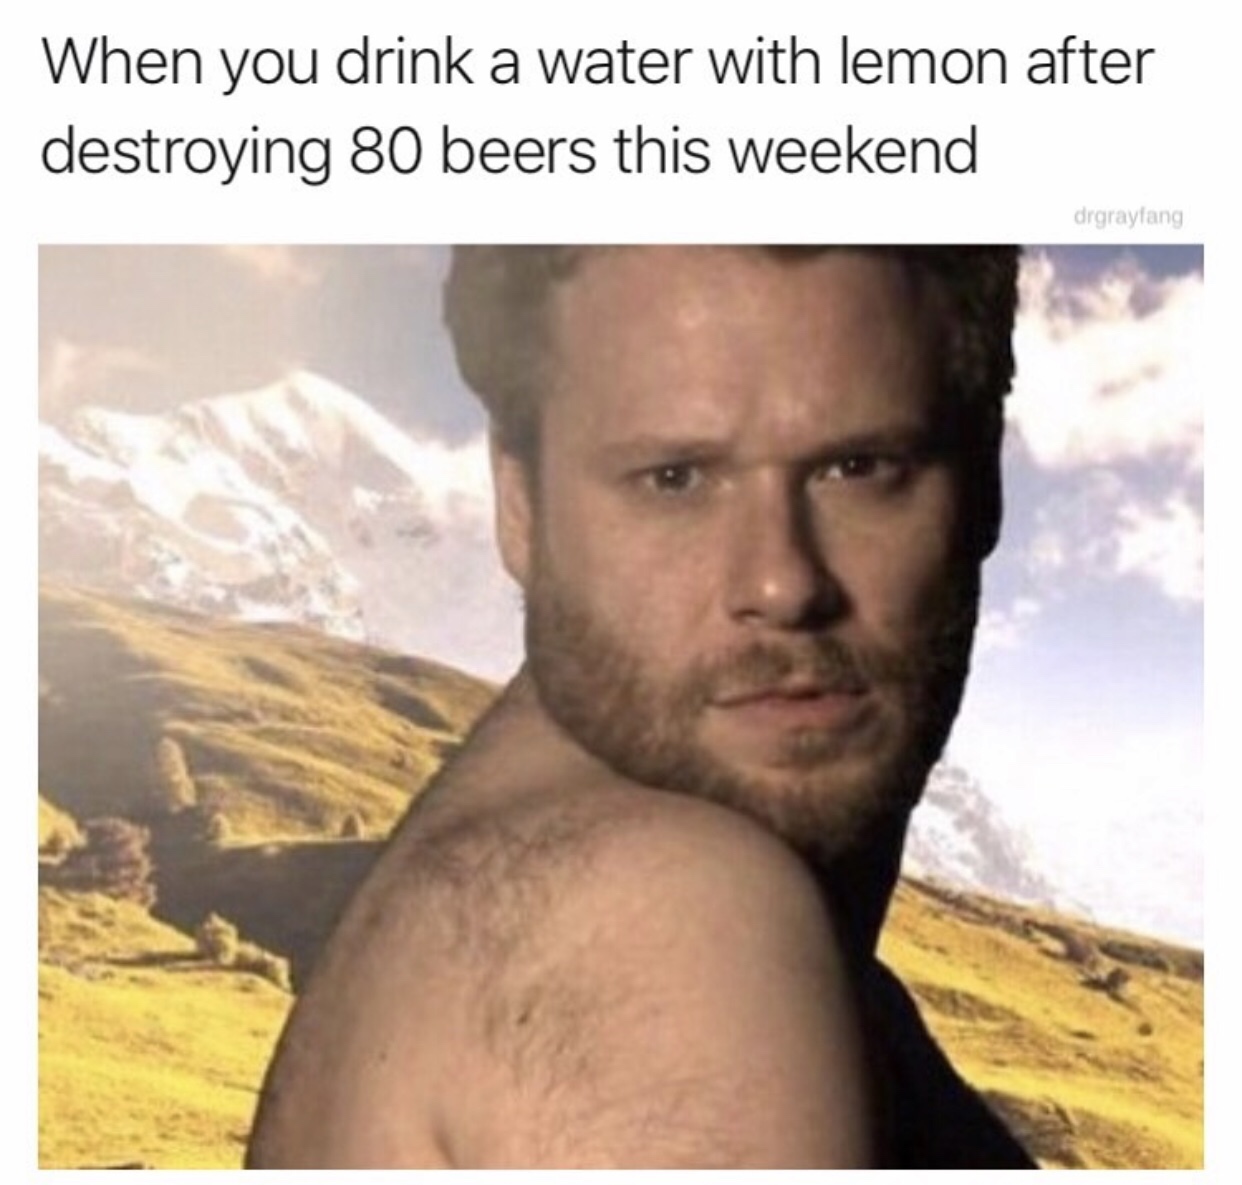 seth rogen - When you drink a water with lemon after destroying 80 beers this weekend drgraylang